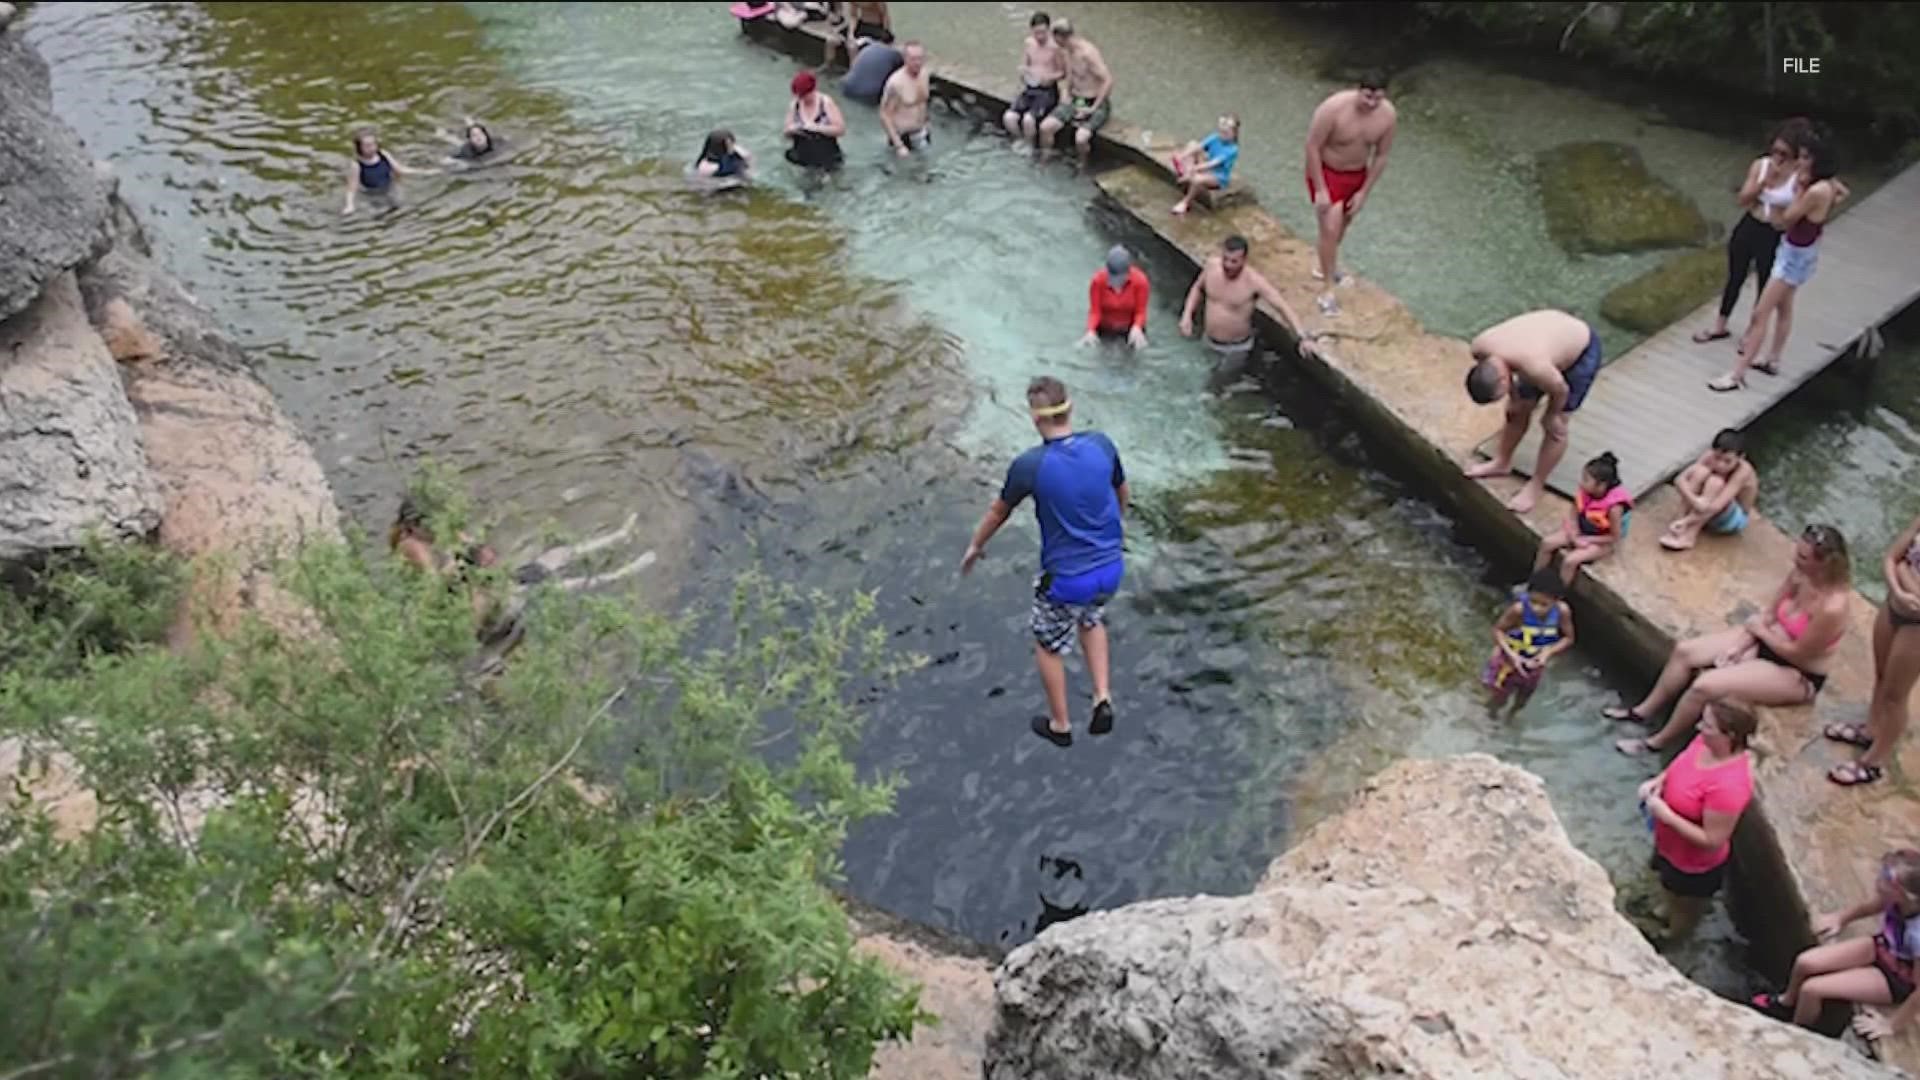 Swimmers will not be able to swim in Jacob's Well for the foreseeable future.